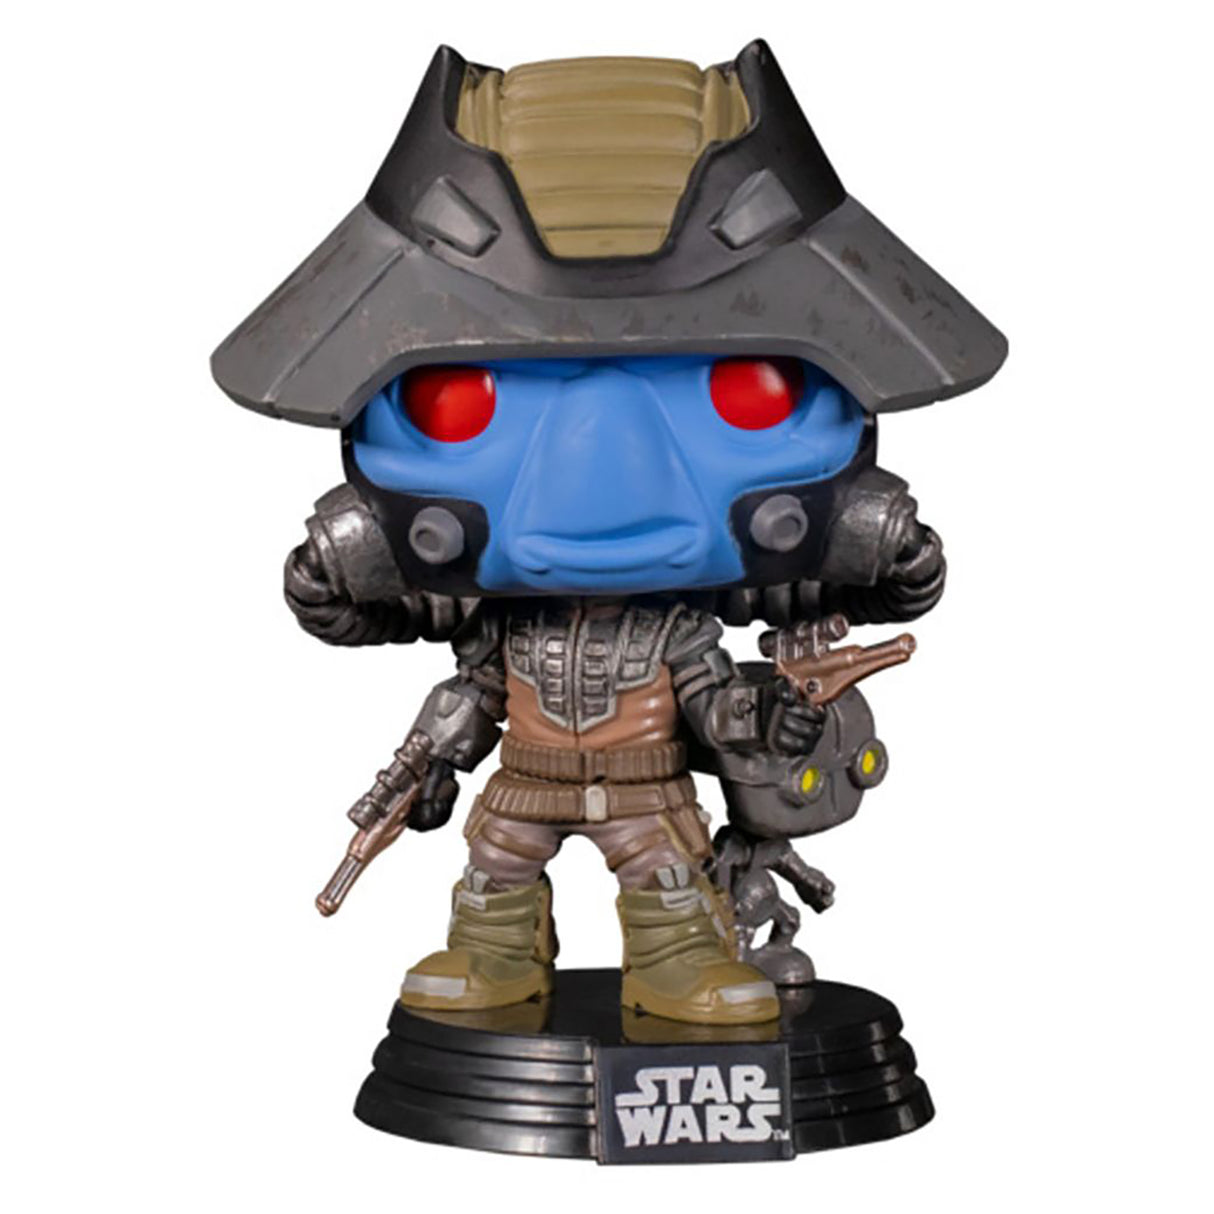 Funko Star Wars: The Clone Wars - Cad Bane with Todo 360 Pop! Vinyl Figure (2021 Festival Of Fun Convention Exclusive)